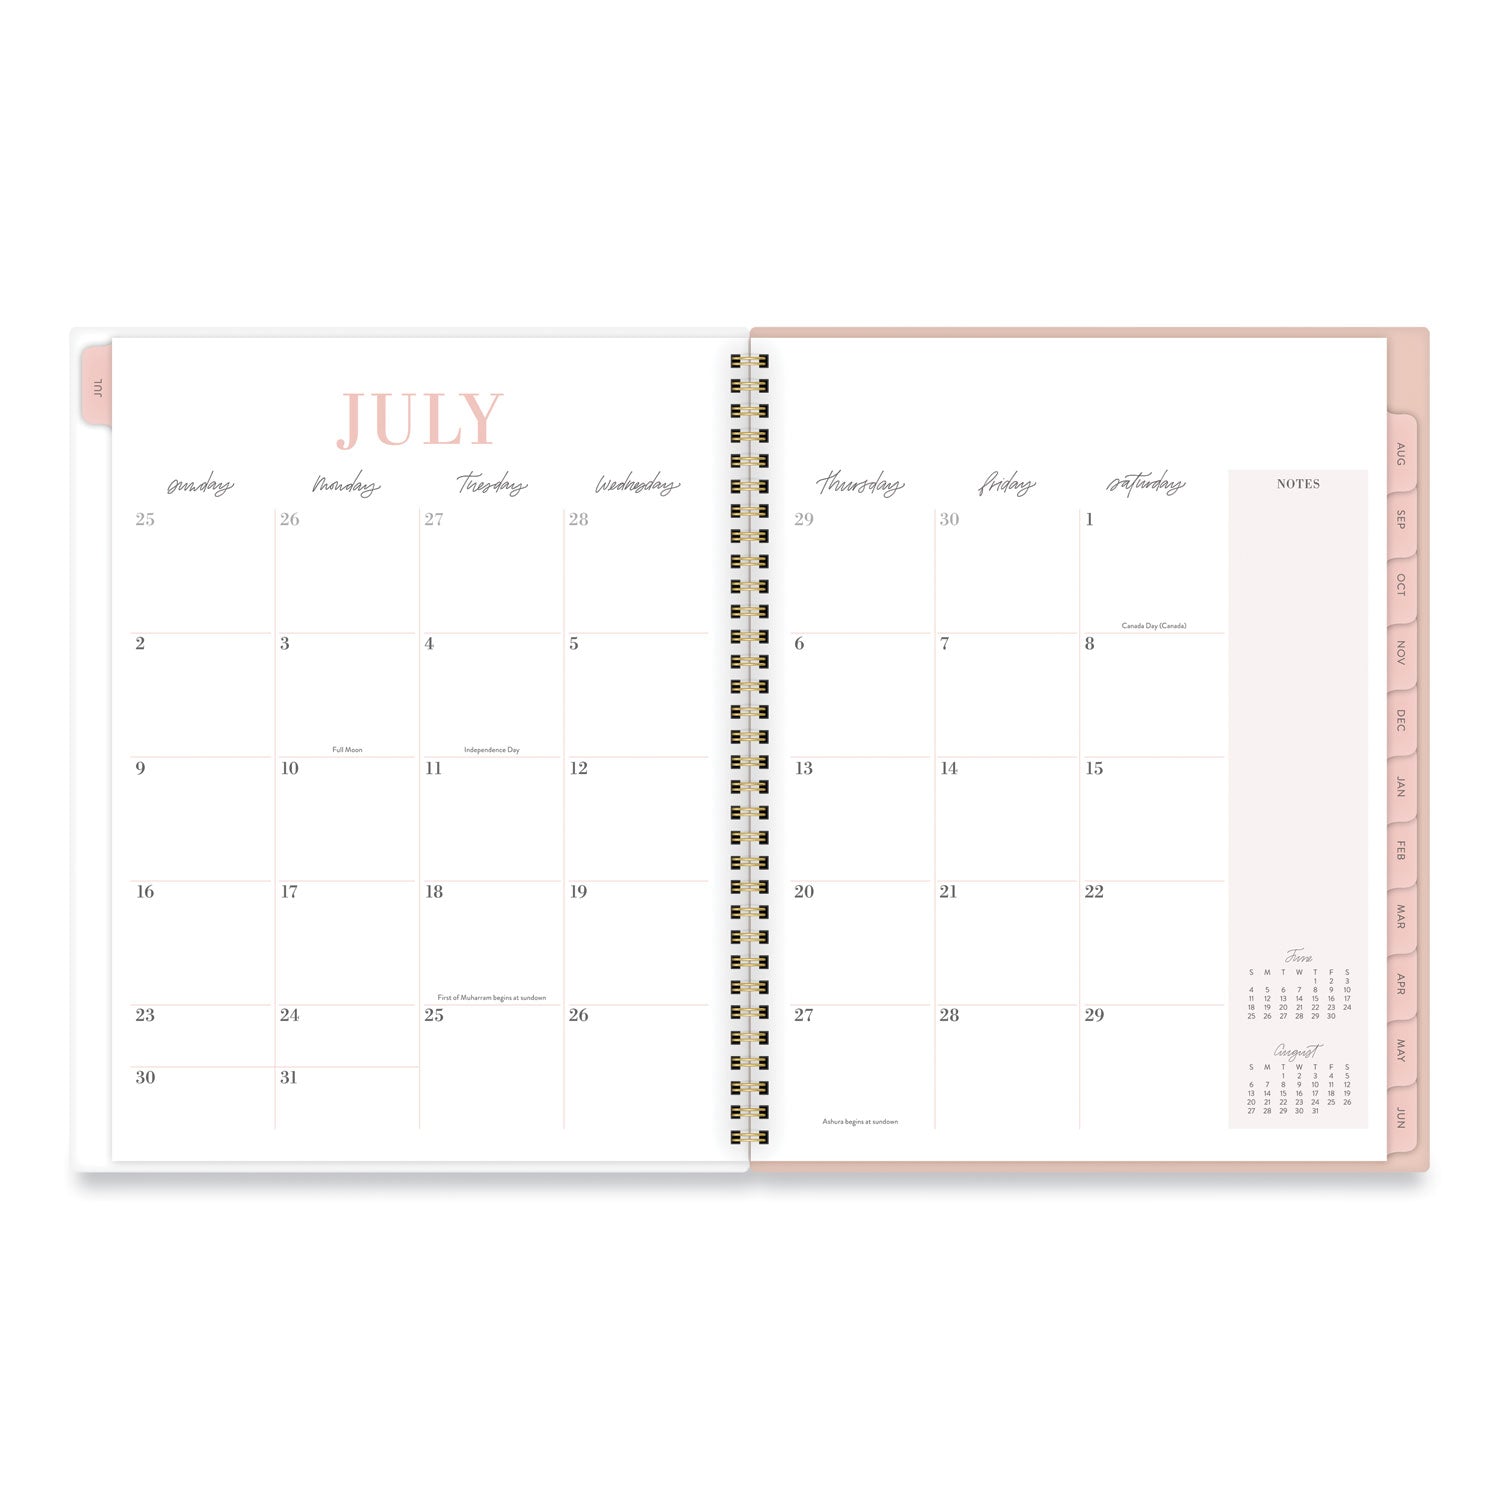 leah-bisch-academic-year-weekly-monthly-planner-floral-art-11-x-987-floral-cover-12-month-july-to-june-2023-to-2024_aaglb21905a - 2